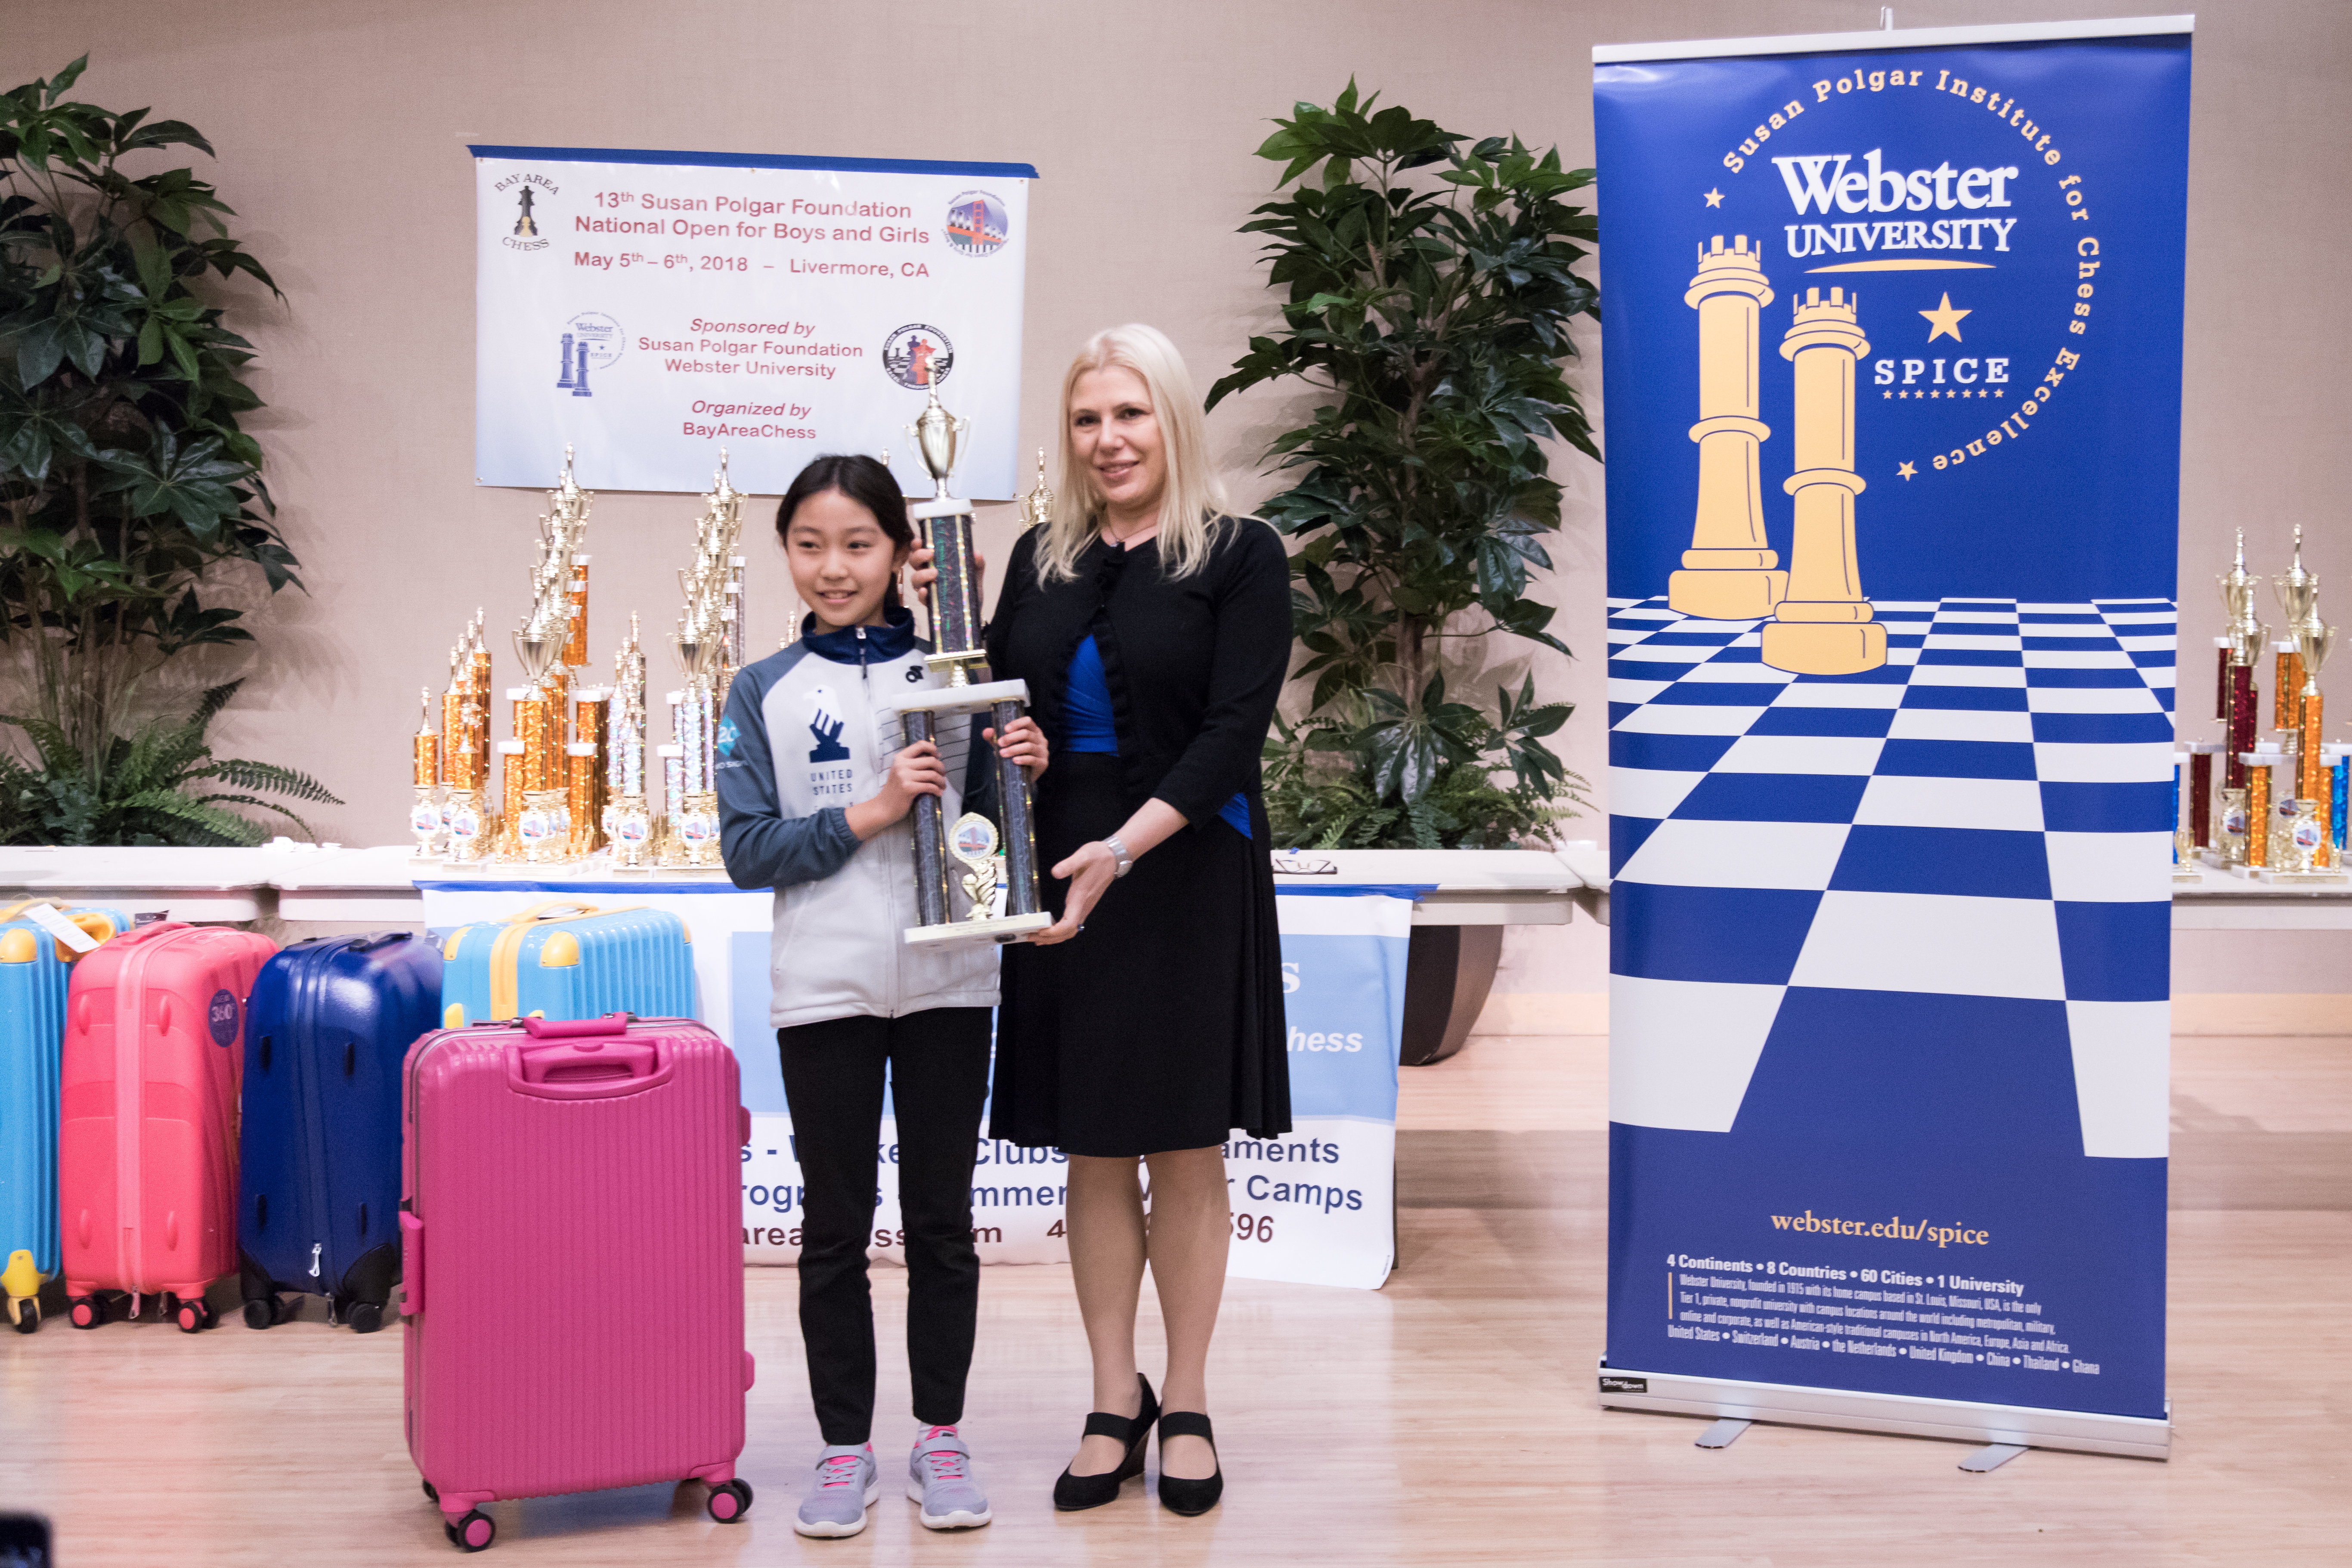 Chess Daily News by Susan Polgar - It's official: GM Kuljasevic